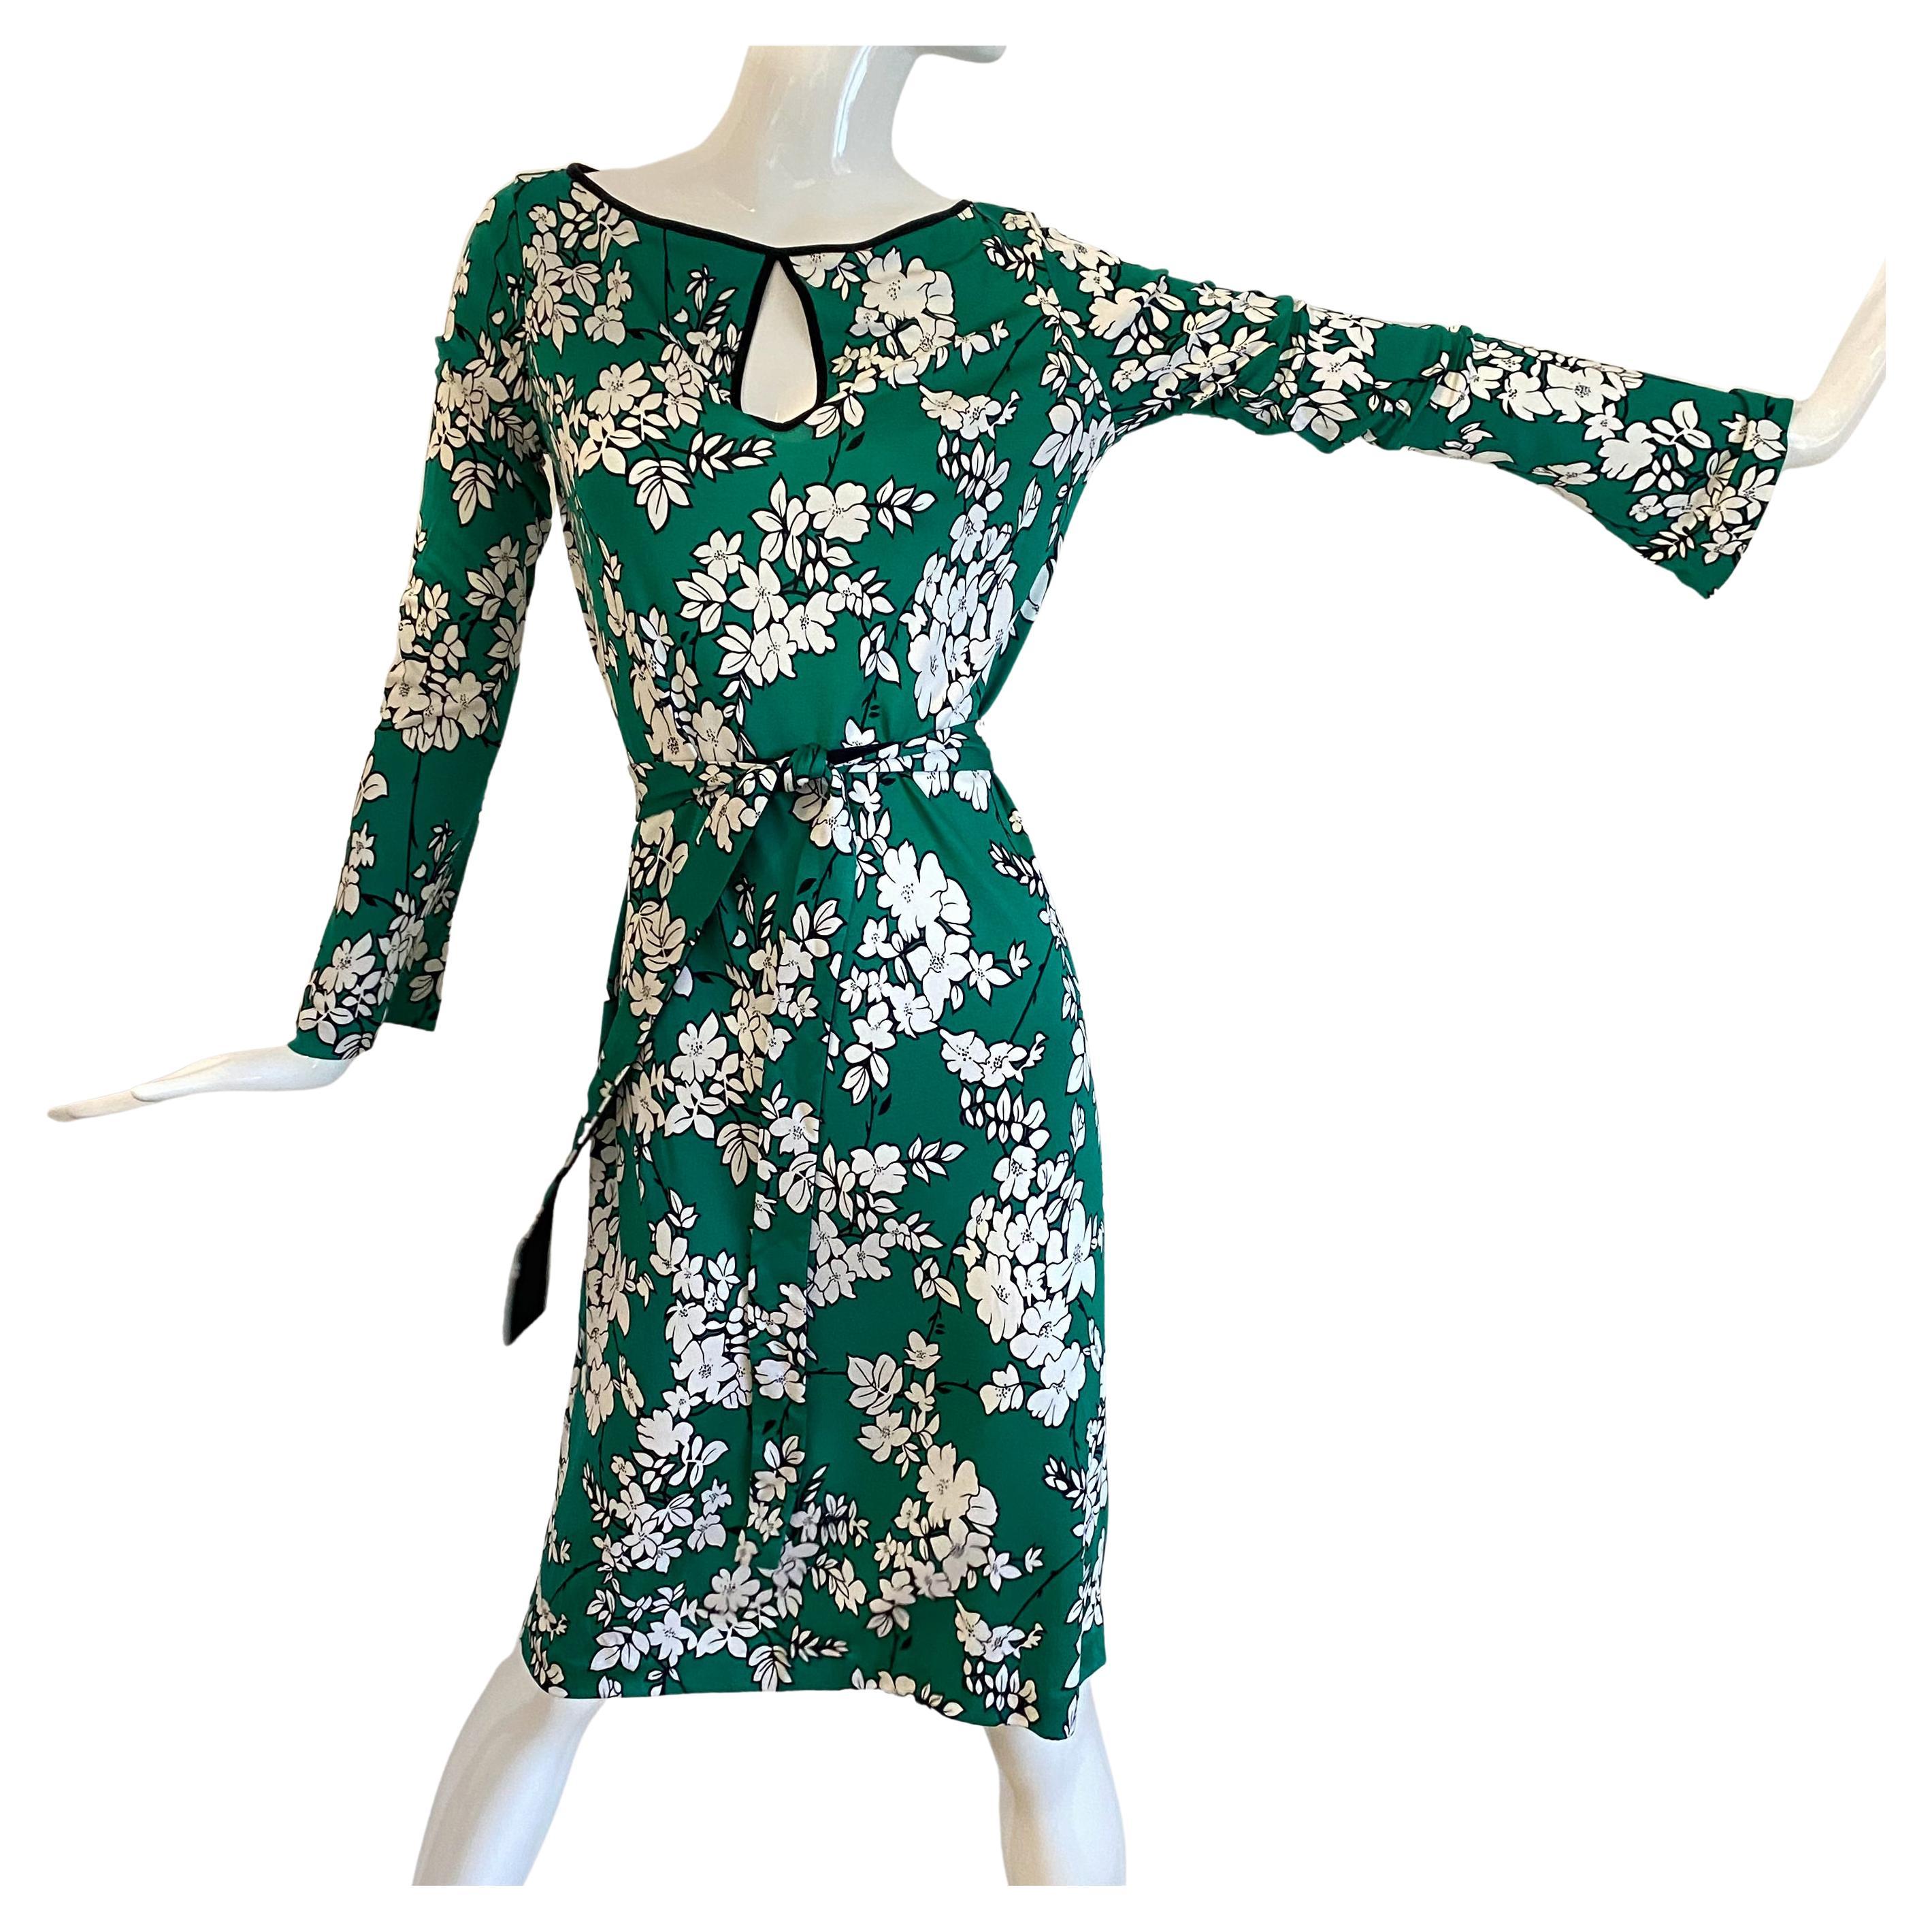 FLORA KUNG Emerald Green Floral Print Silk Shift Dress - NWT For Sale